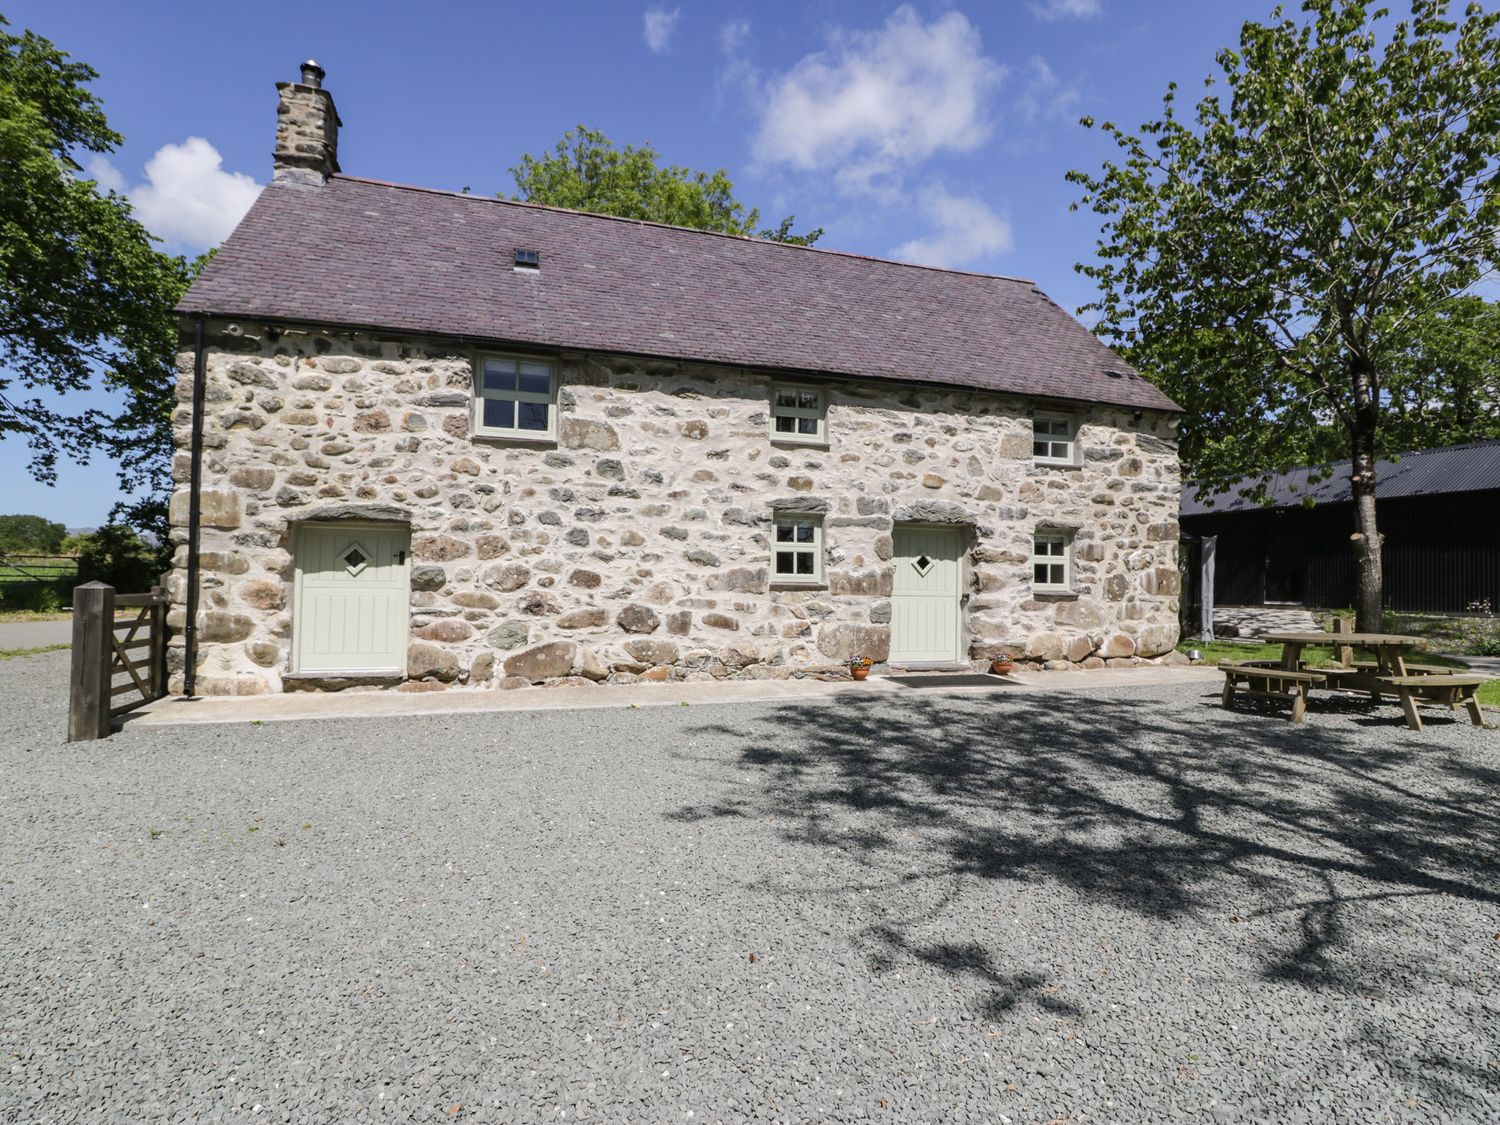 The Stables, Chwilog